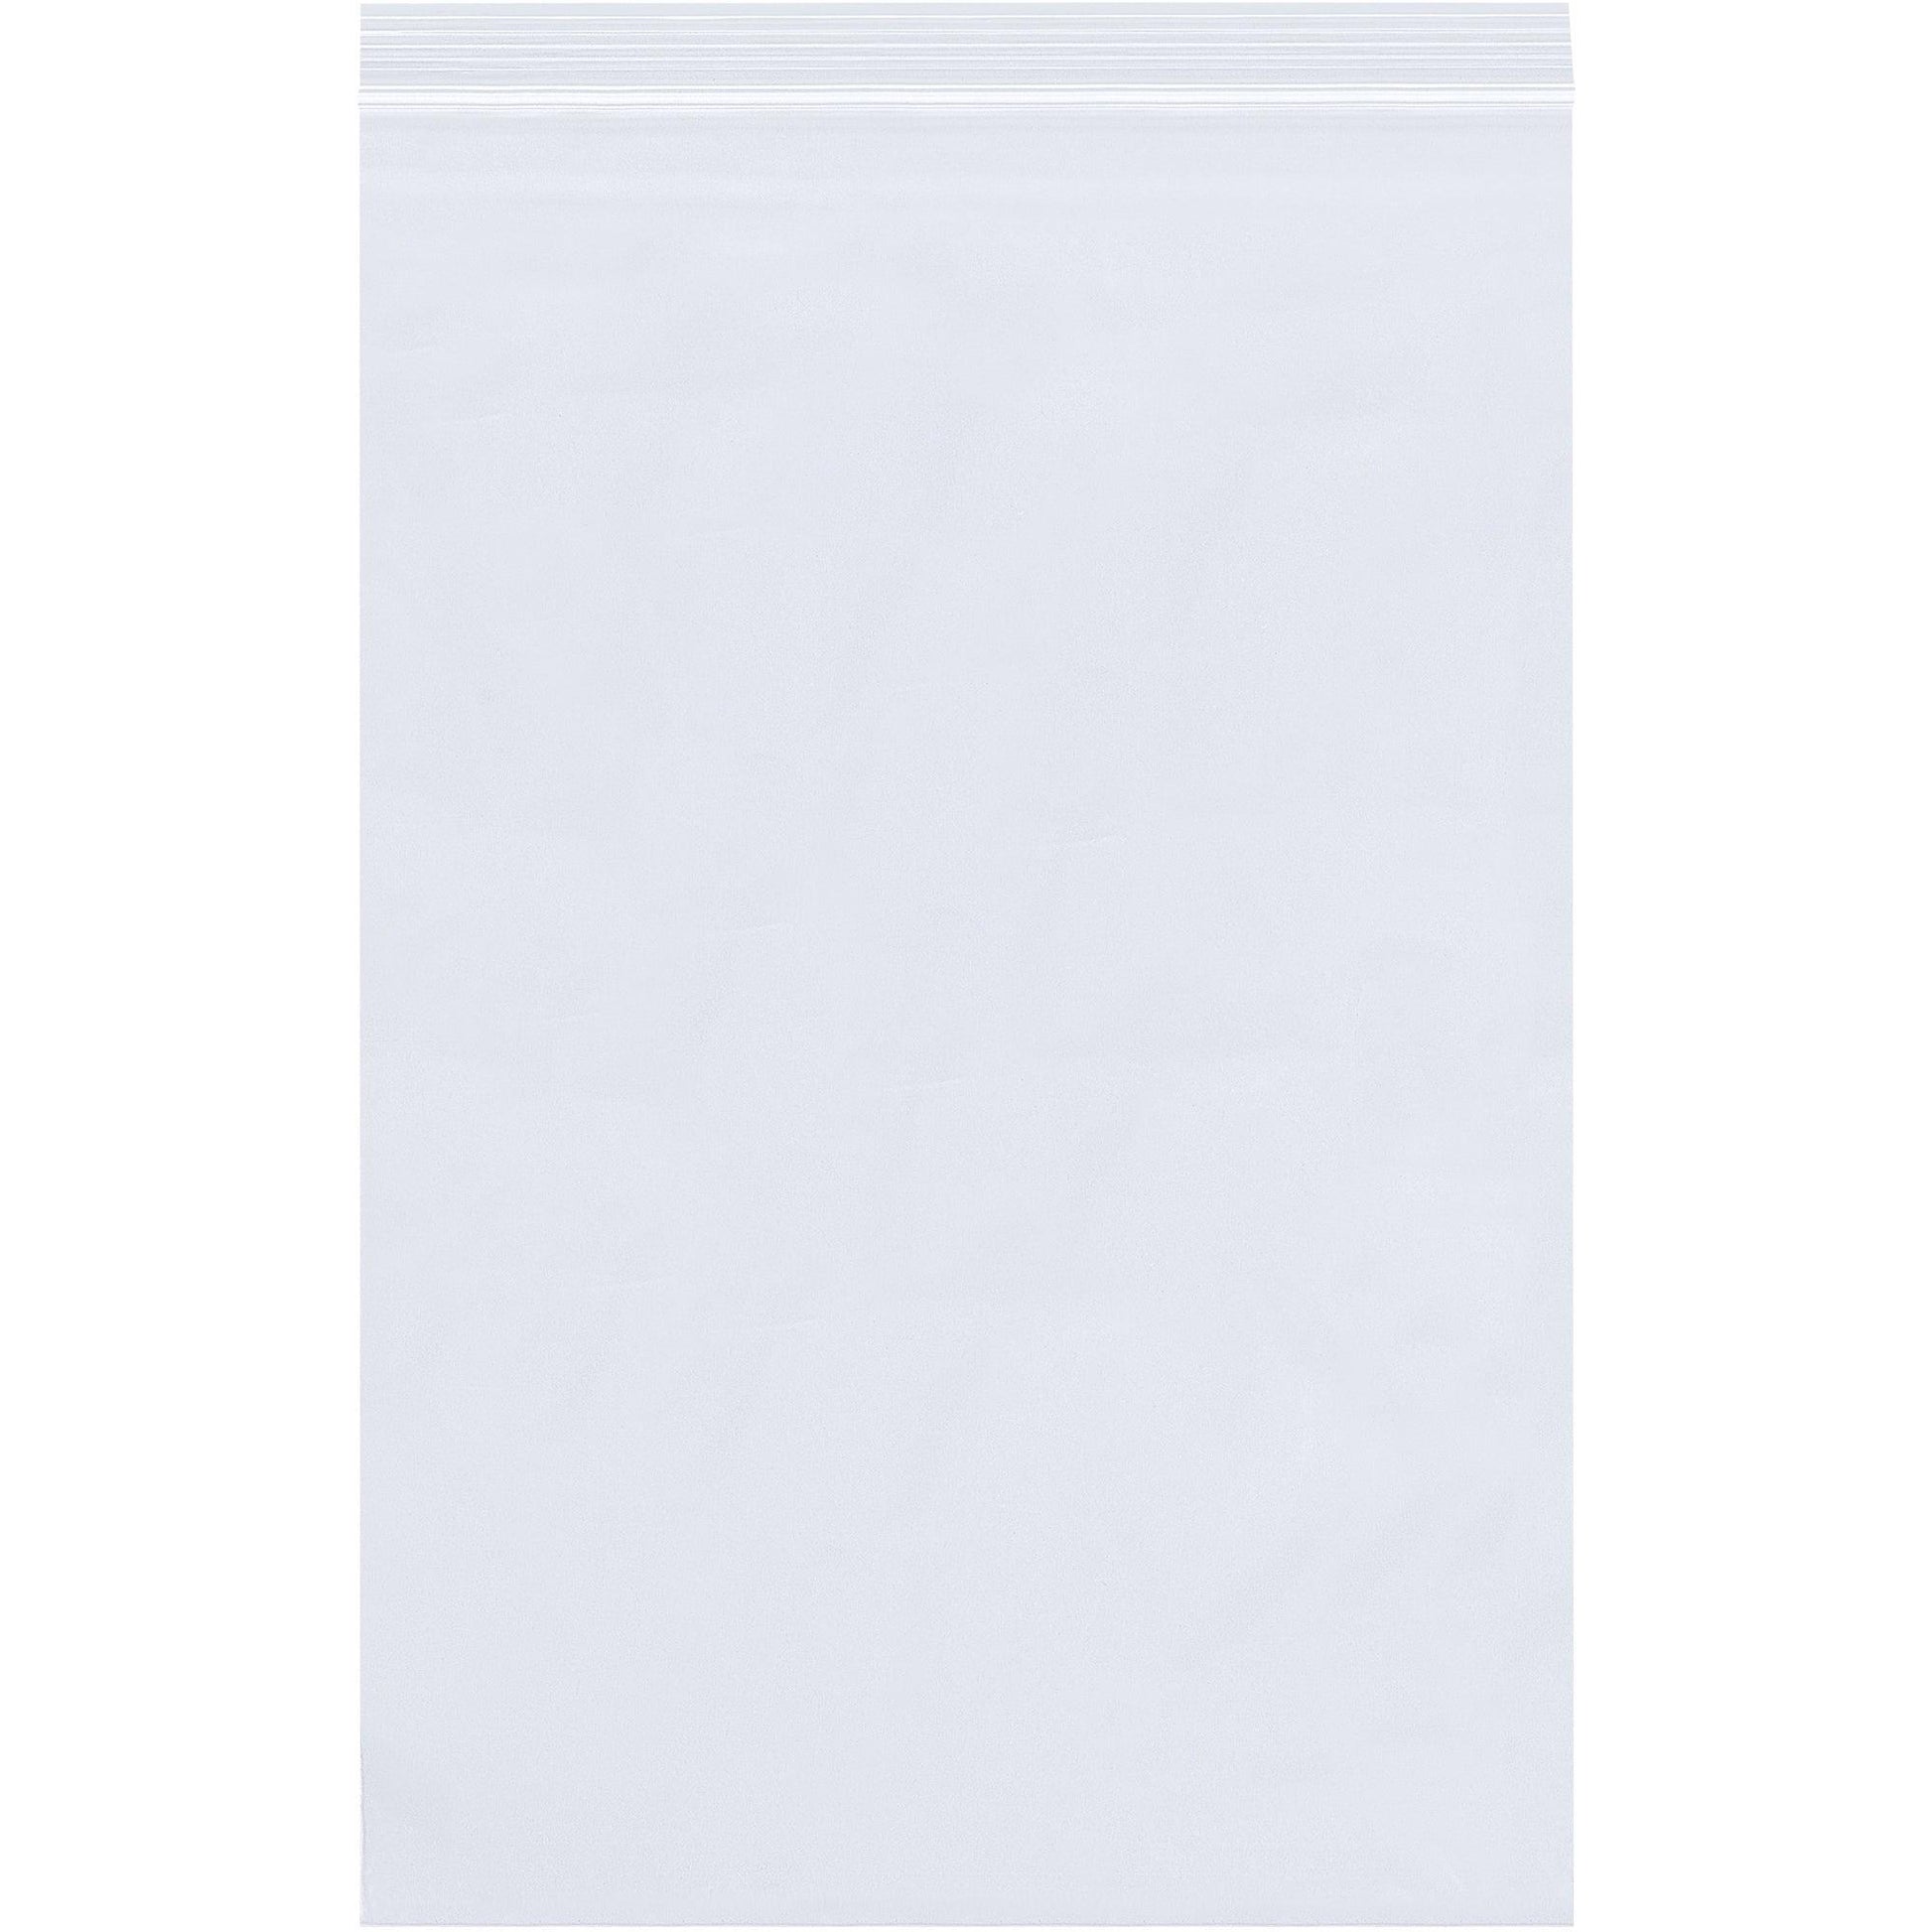 15 x 18" - 6 Mil Reclosable Poly Bags - PB3899